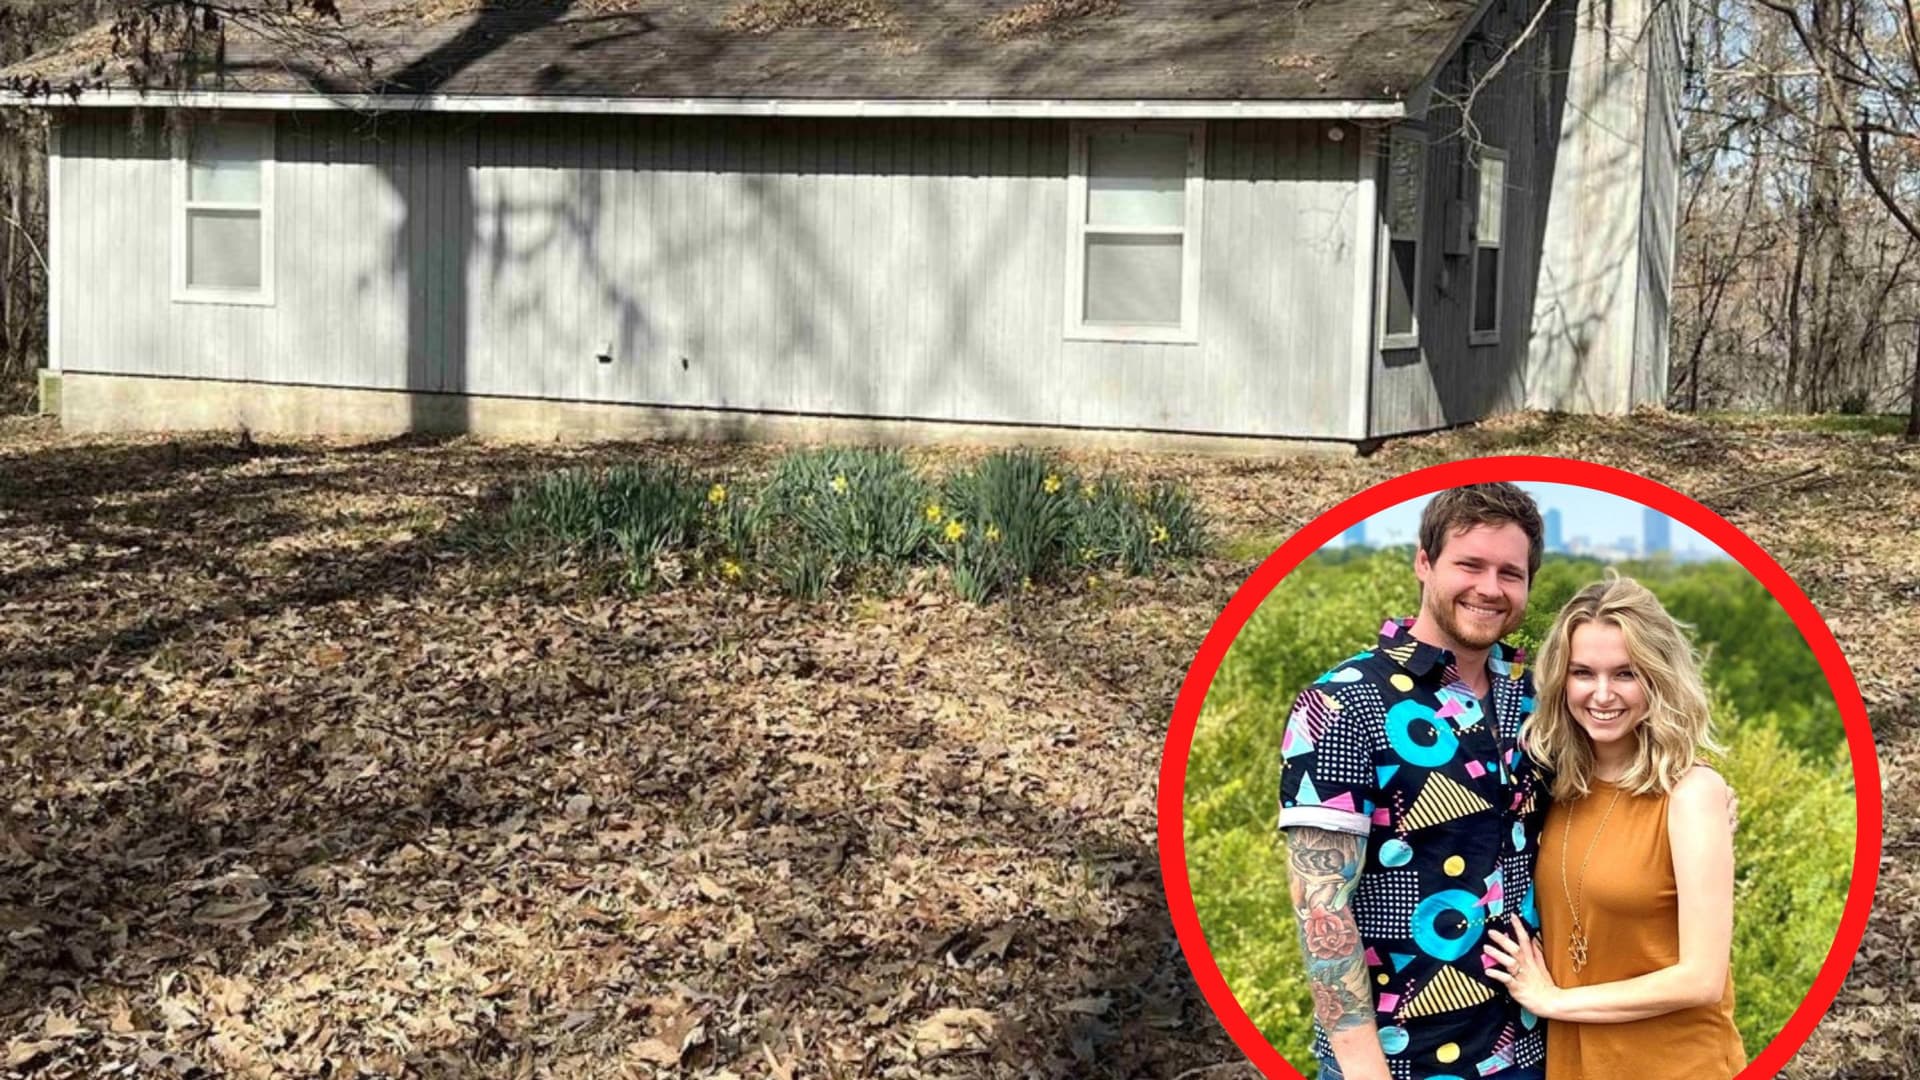 Airbnb hosts in Texas buy abandoned house for under 0,000 and find ‘valuable collectibles’ inside